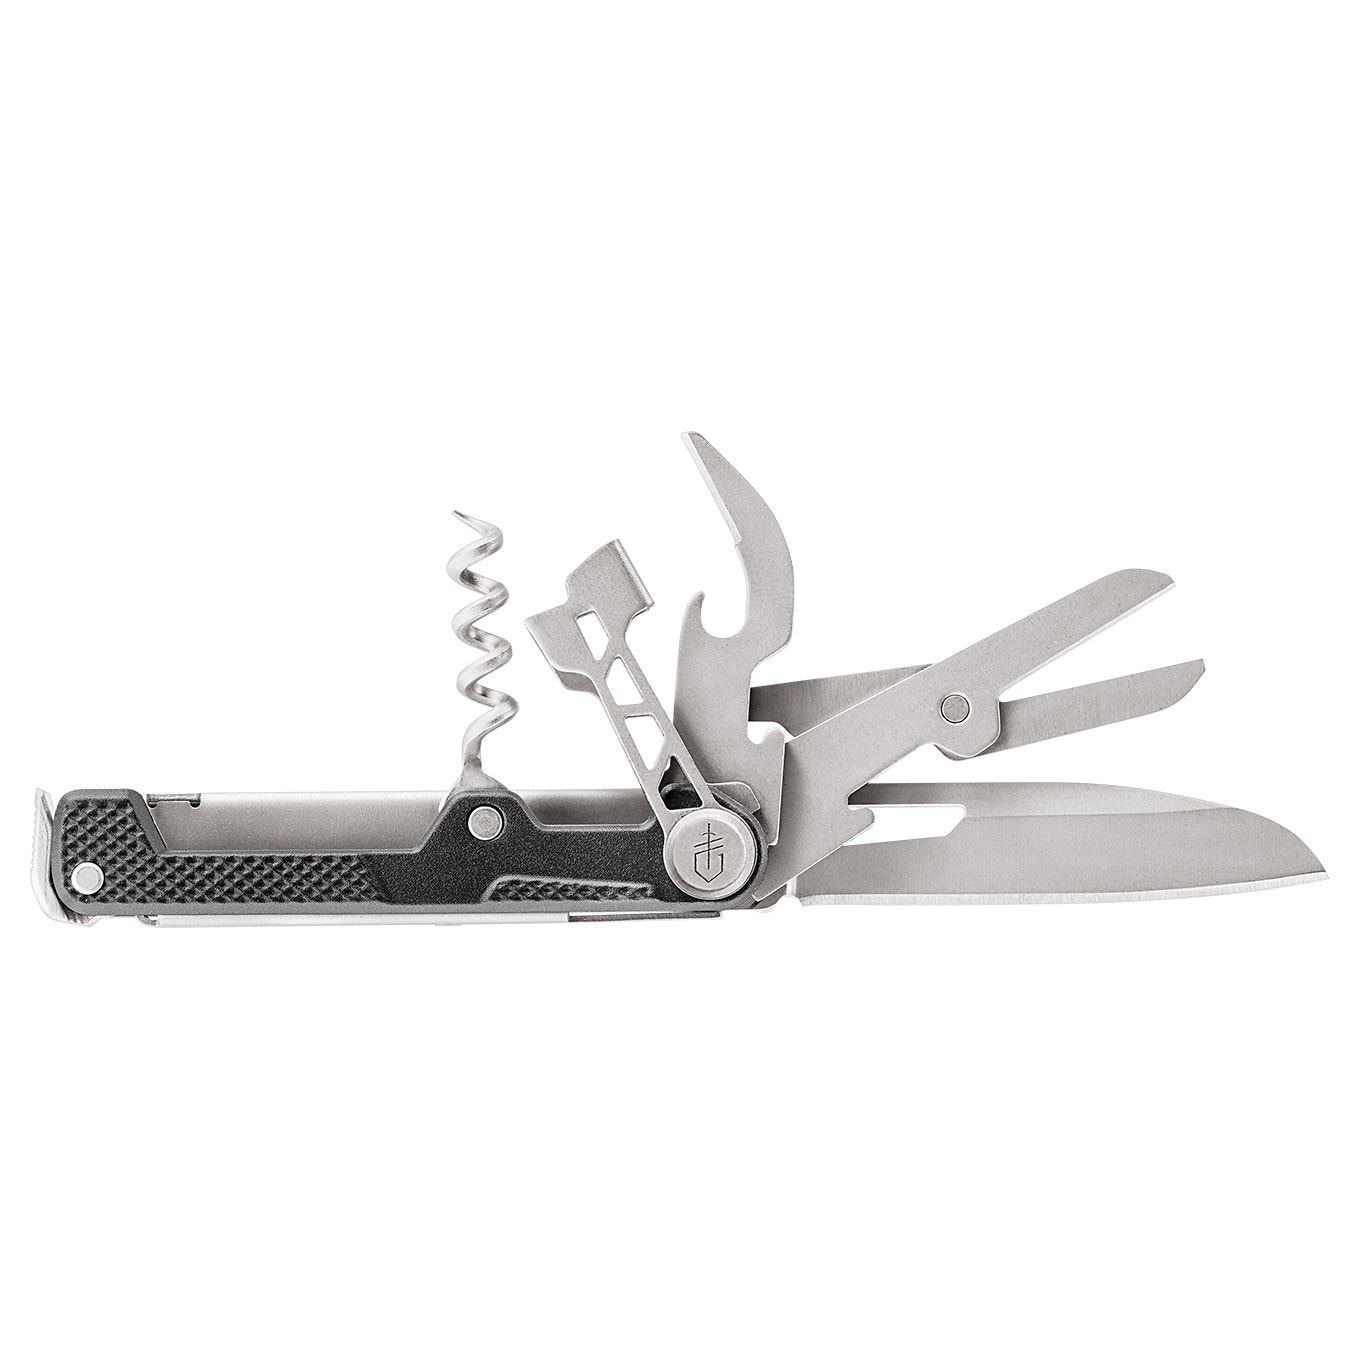 Gerber Tagged 刀與工具Knives & Tools - 毅成戶外用品RC Outfitters